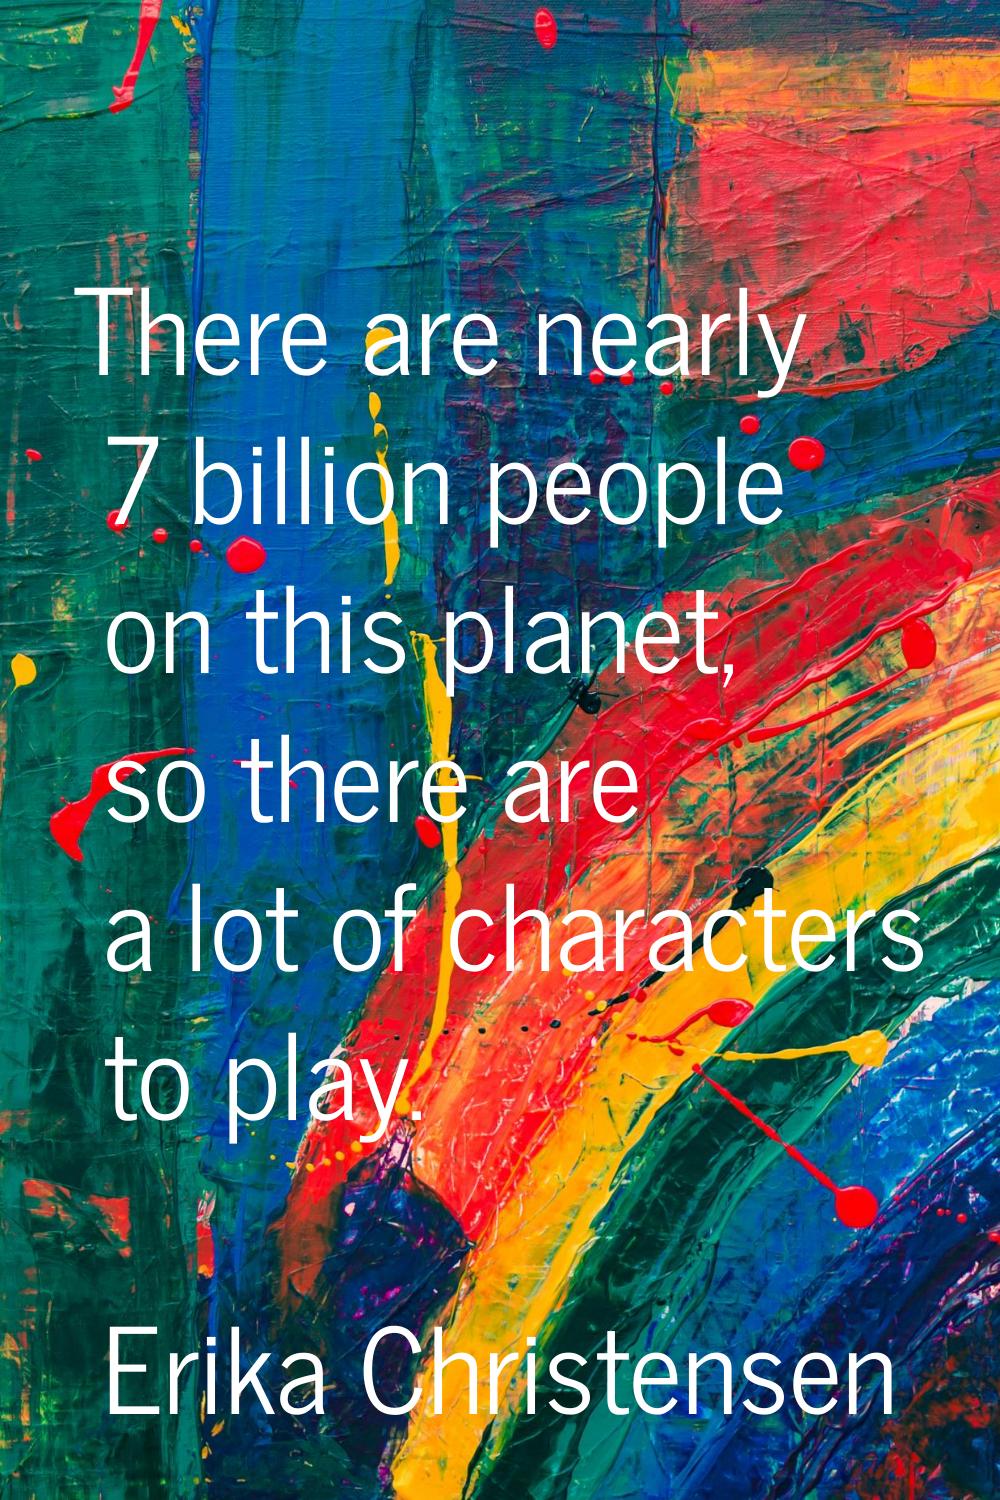 There are nearly 7 billion people on this planet, so there are a lot of characters to play.